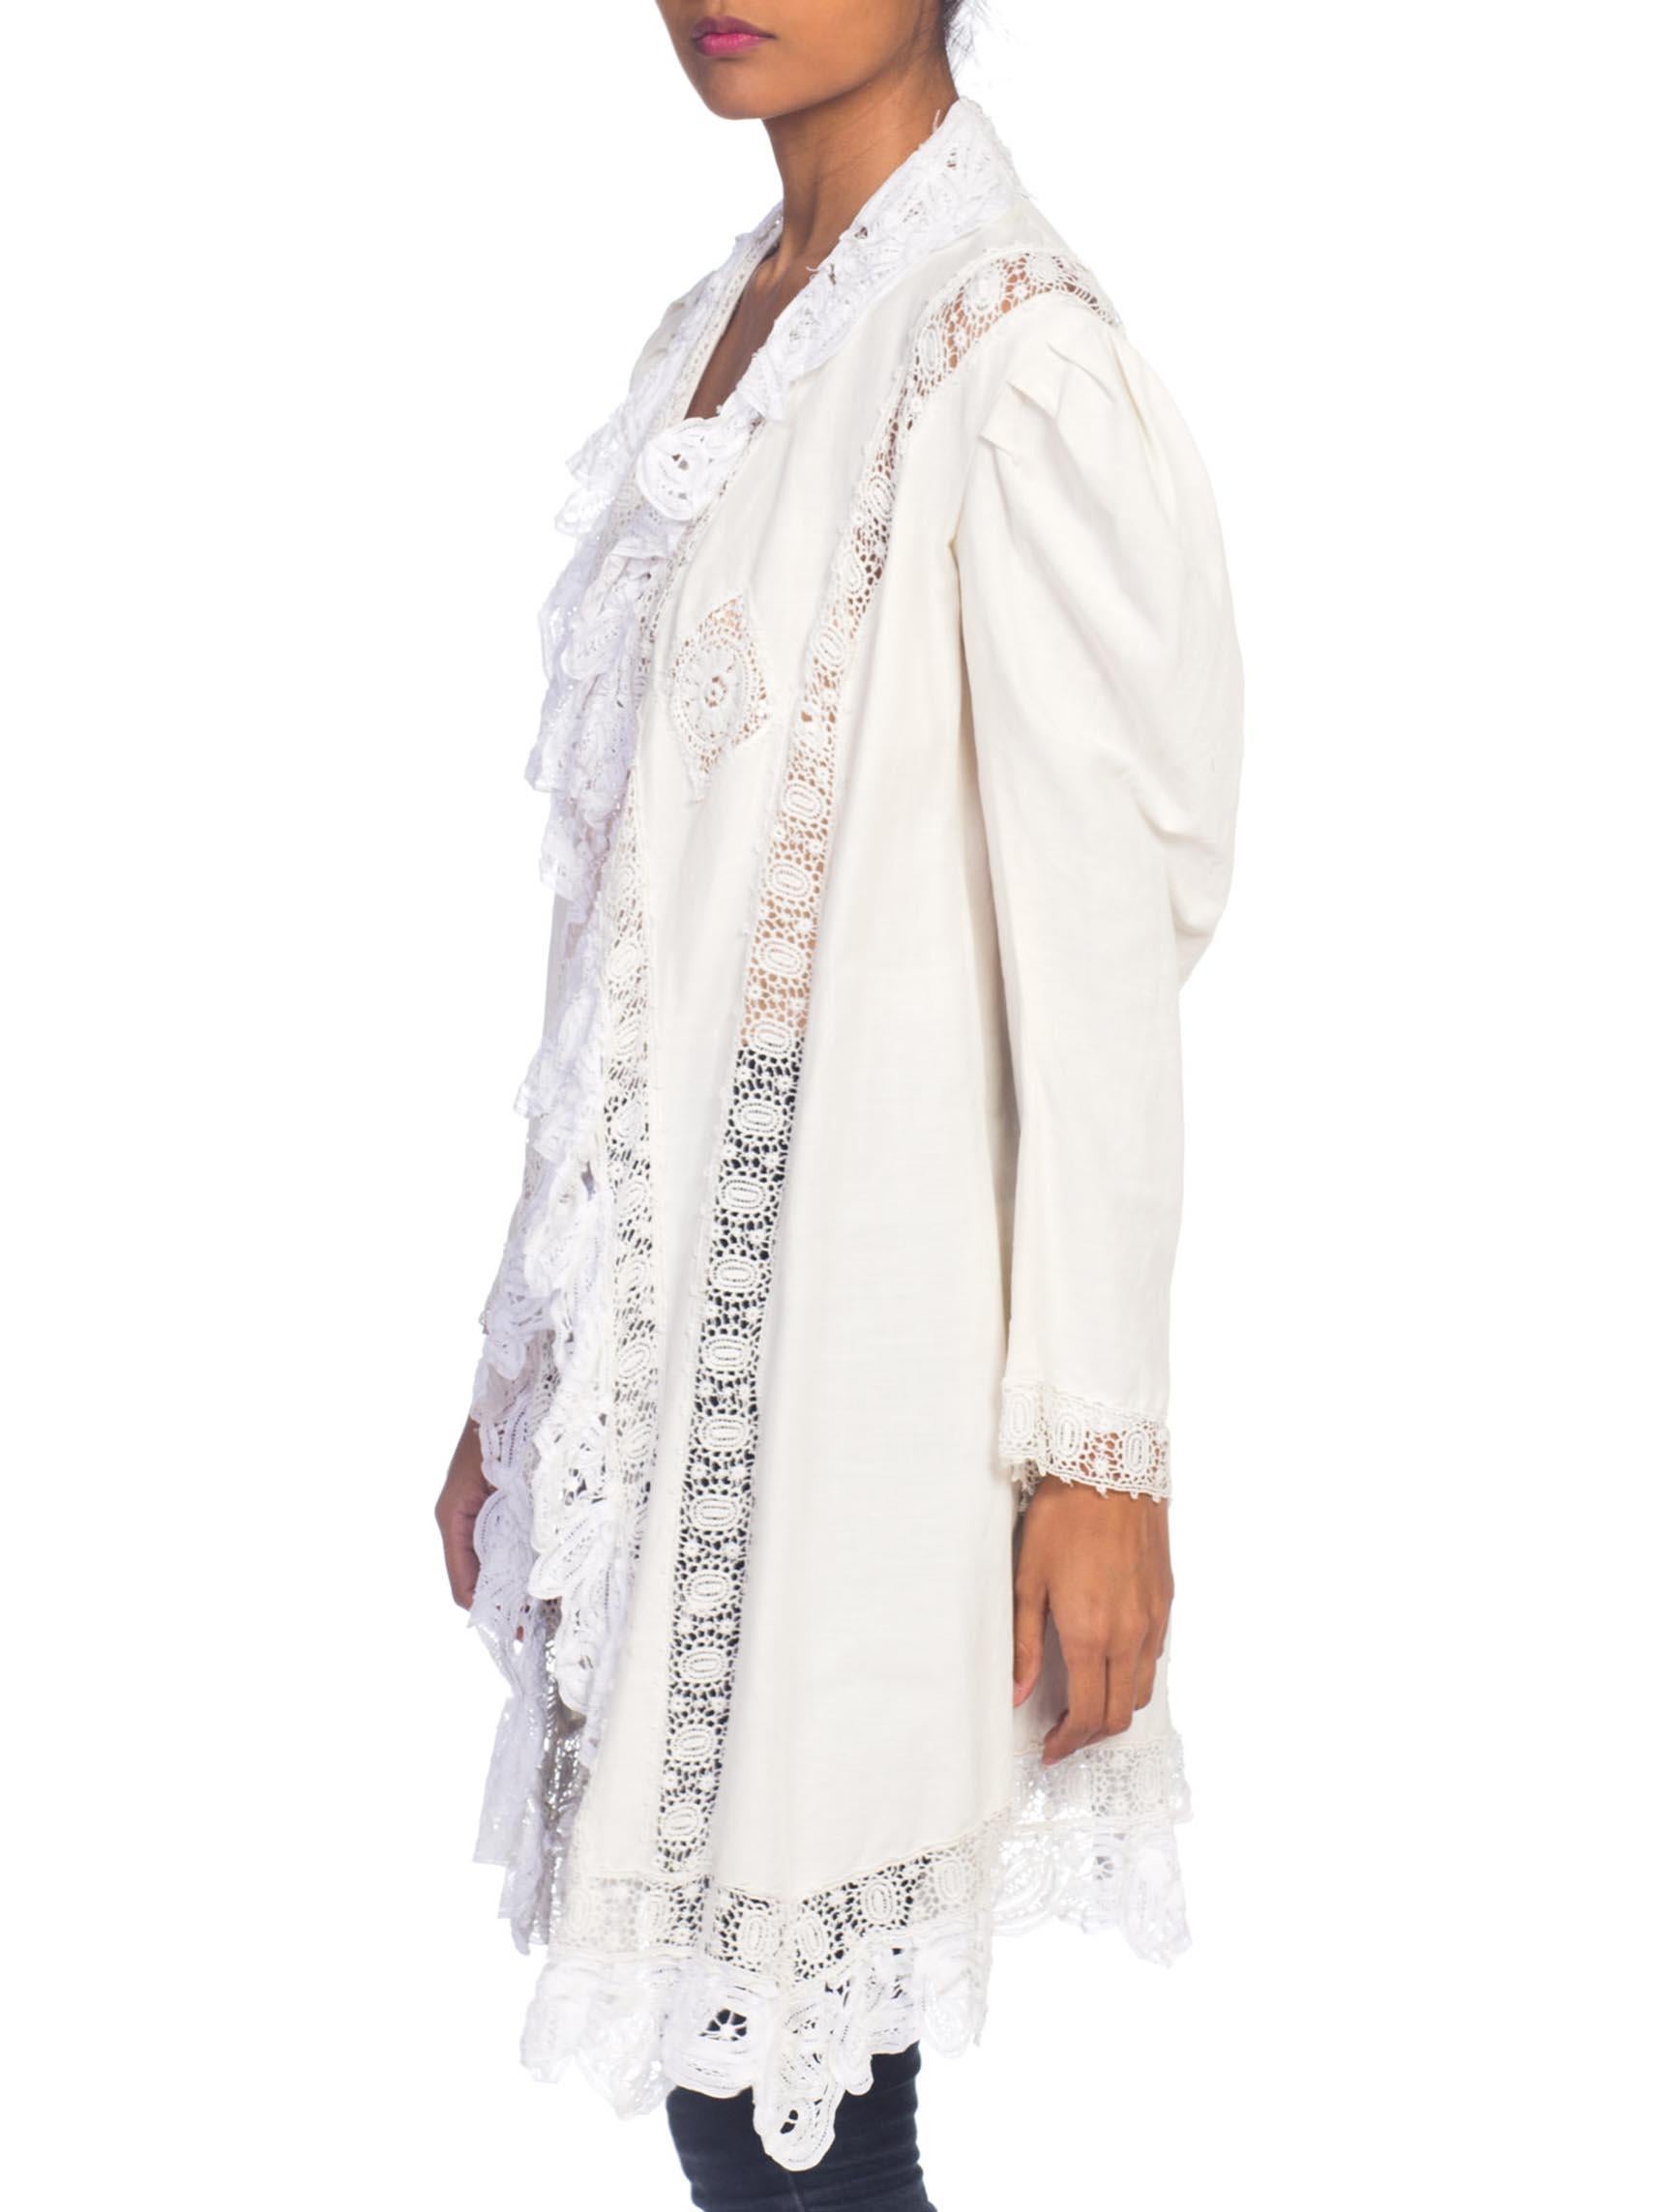 Victorian White Organic Cotton Jacket With Handmade Lace Trim For Sale 1